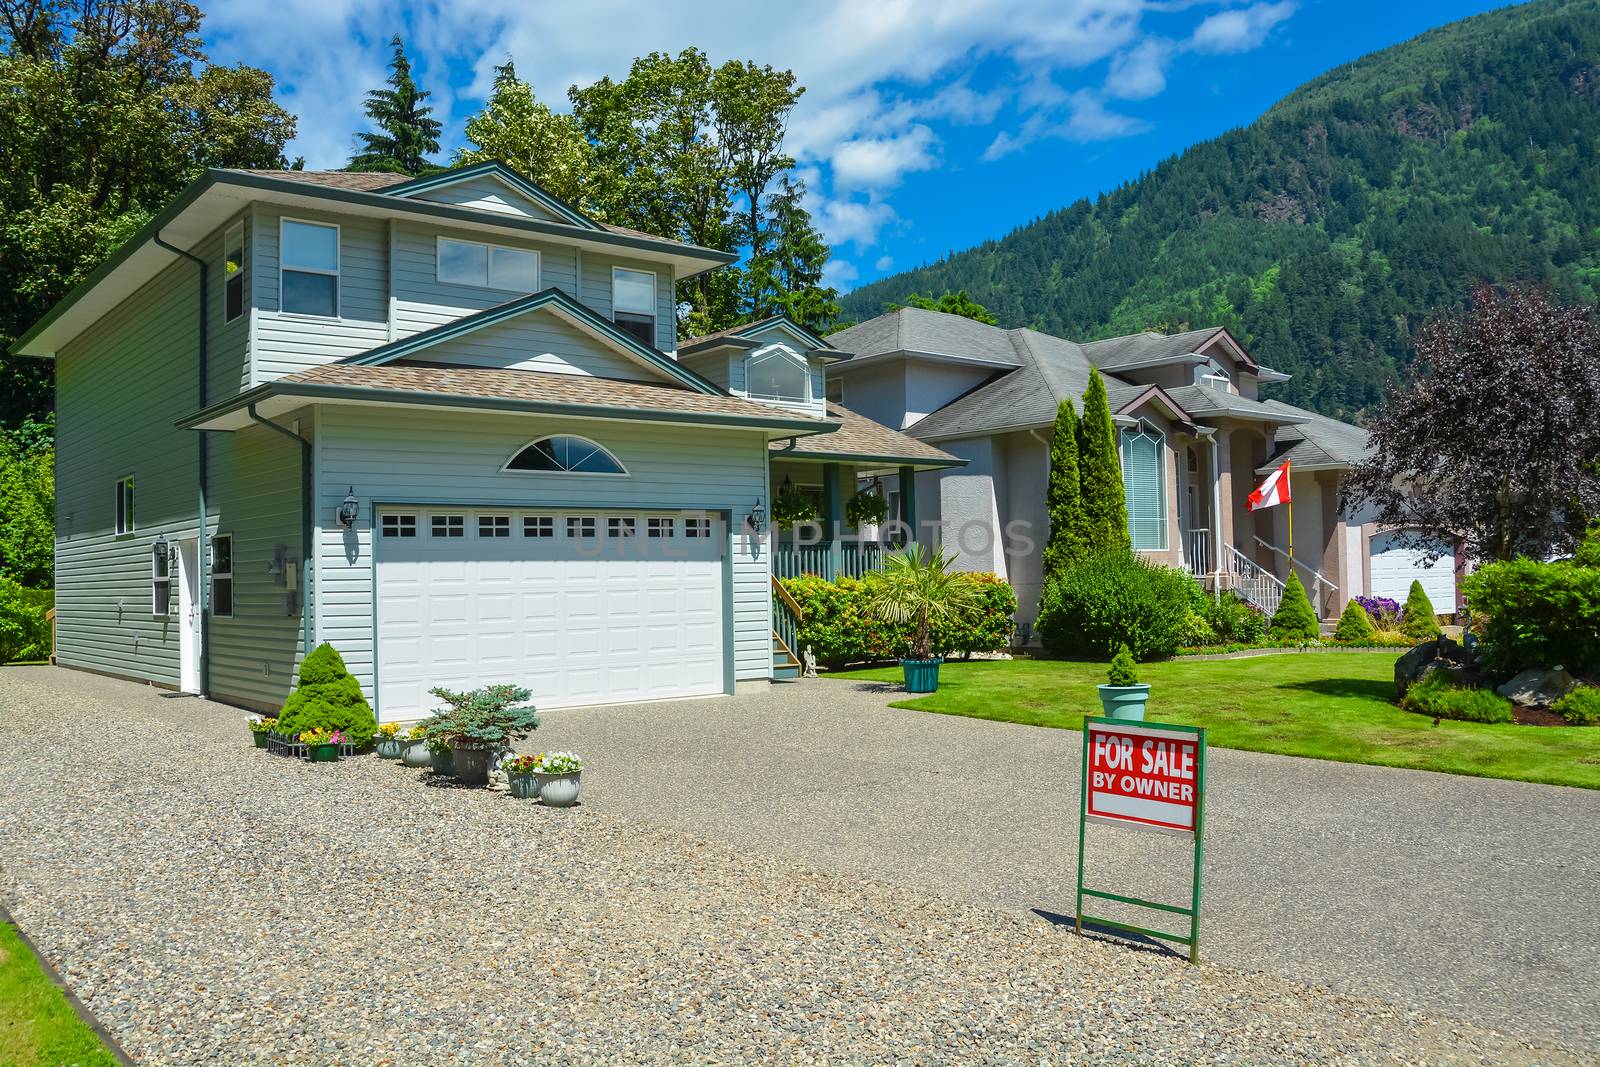 Suburban house in British Columbia for sale. Big house with wide garage door, concrete driveway, and lawn in front for sale. House with mountain view and blue sky background.